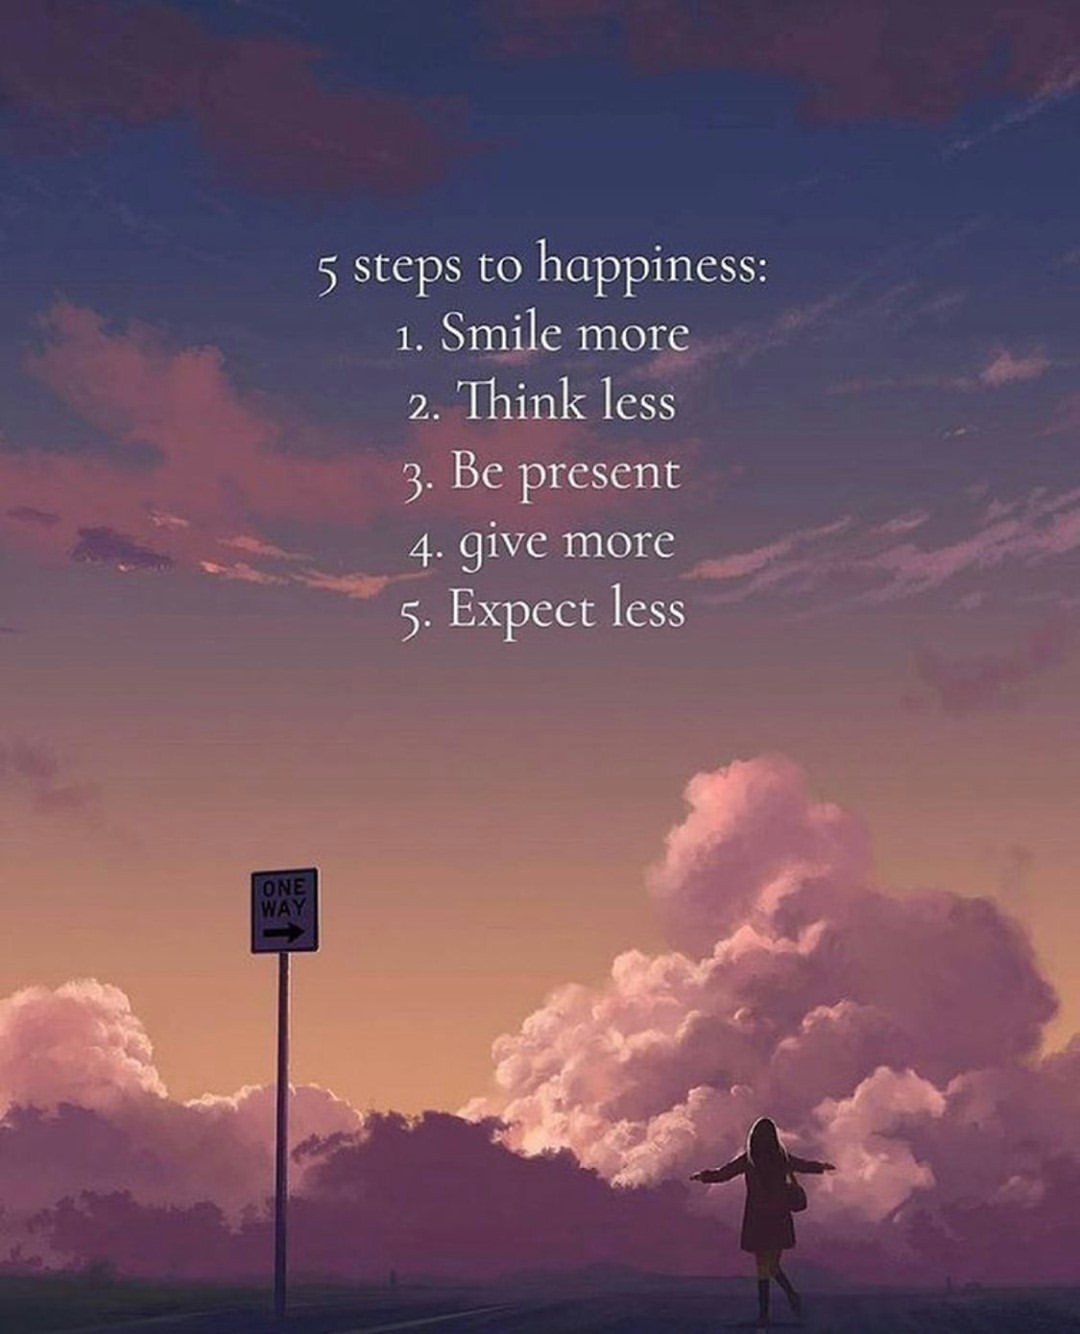 5 steps to happiness: 1. Smile more 2. Think less 3. Be present 4. give more 5. Expect less.